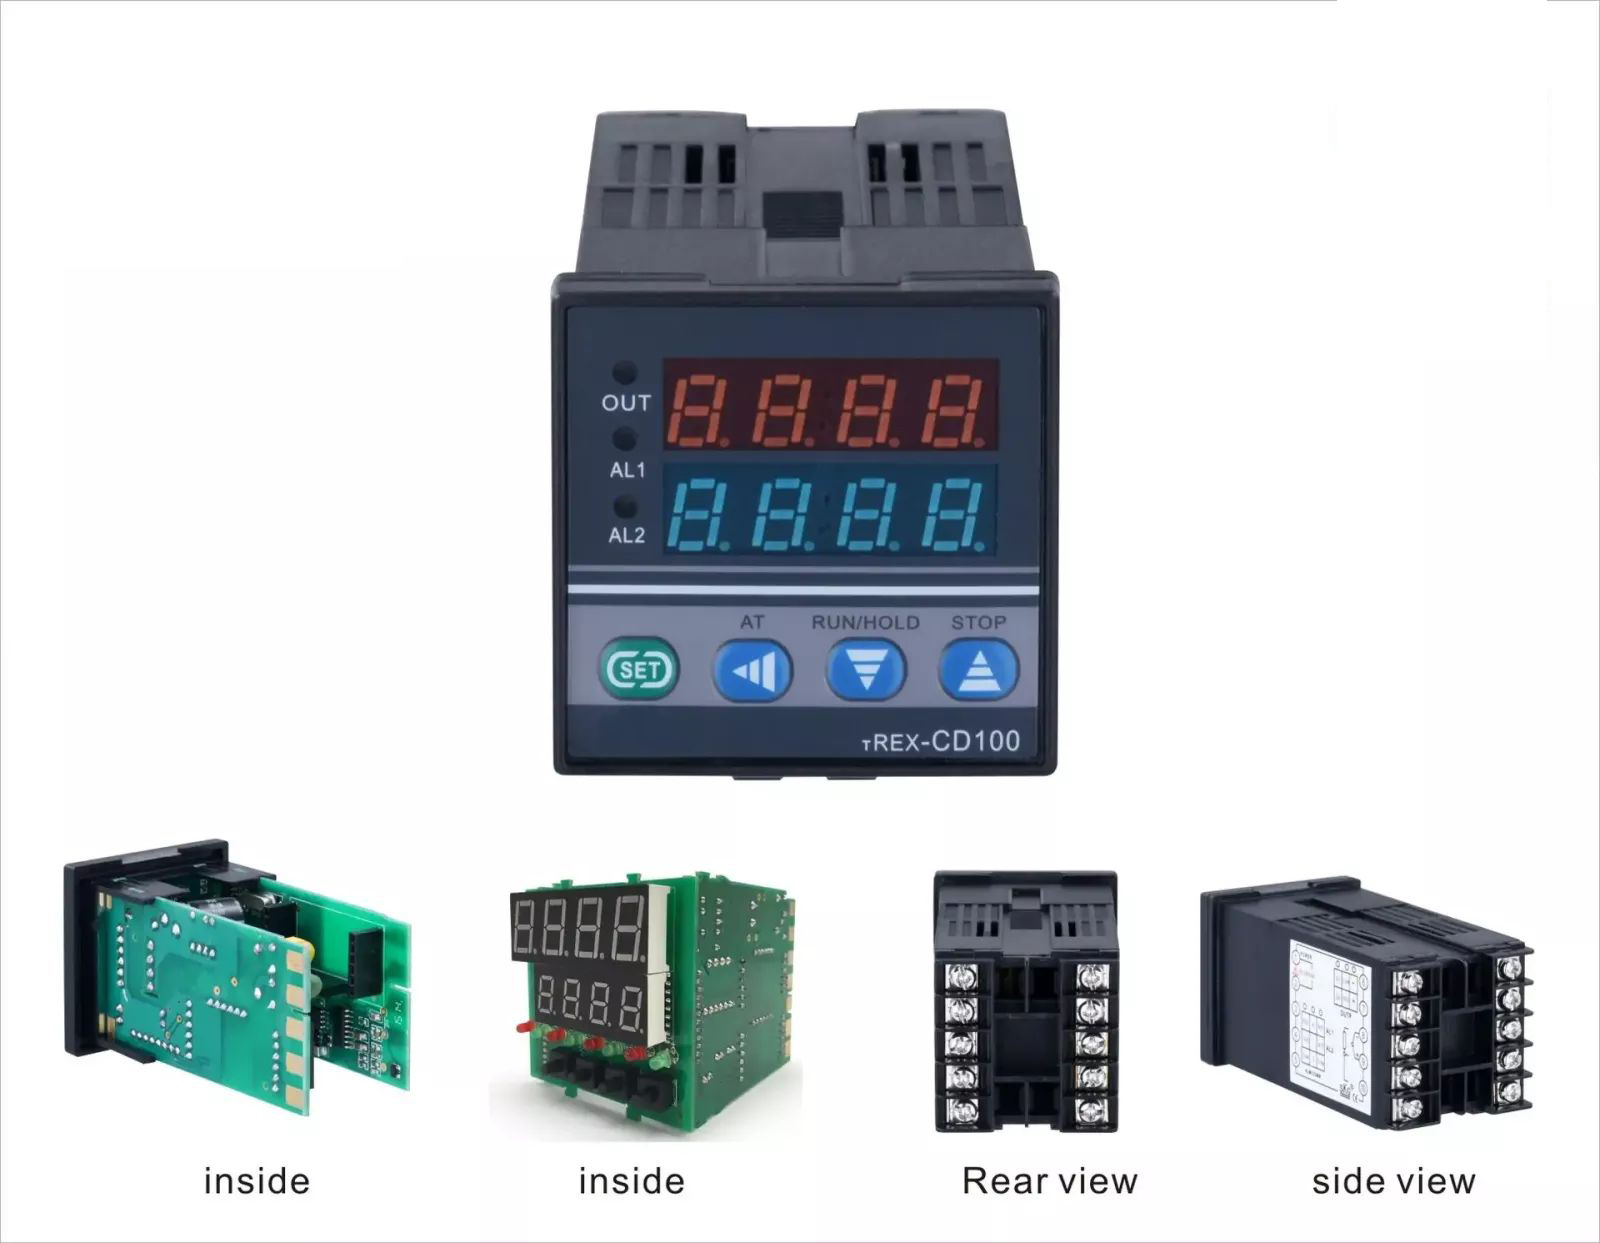 AT908-CD100 universal iput digital pid controller with rs485